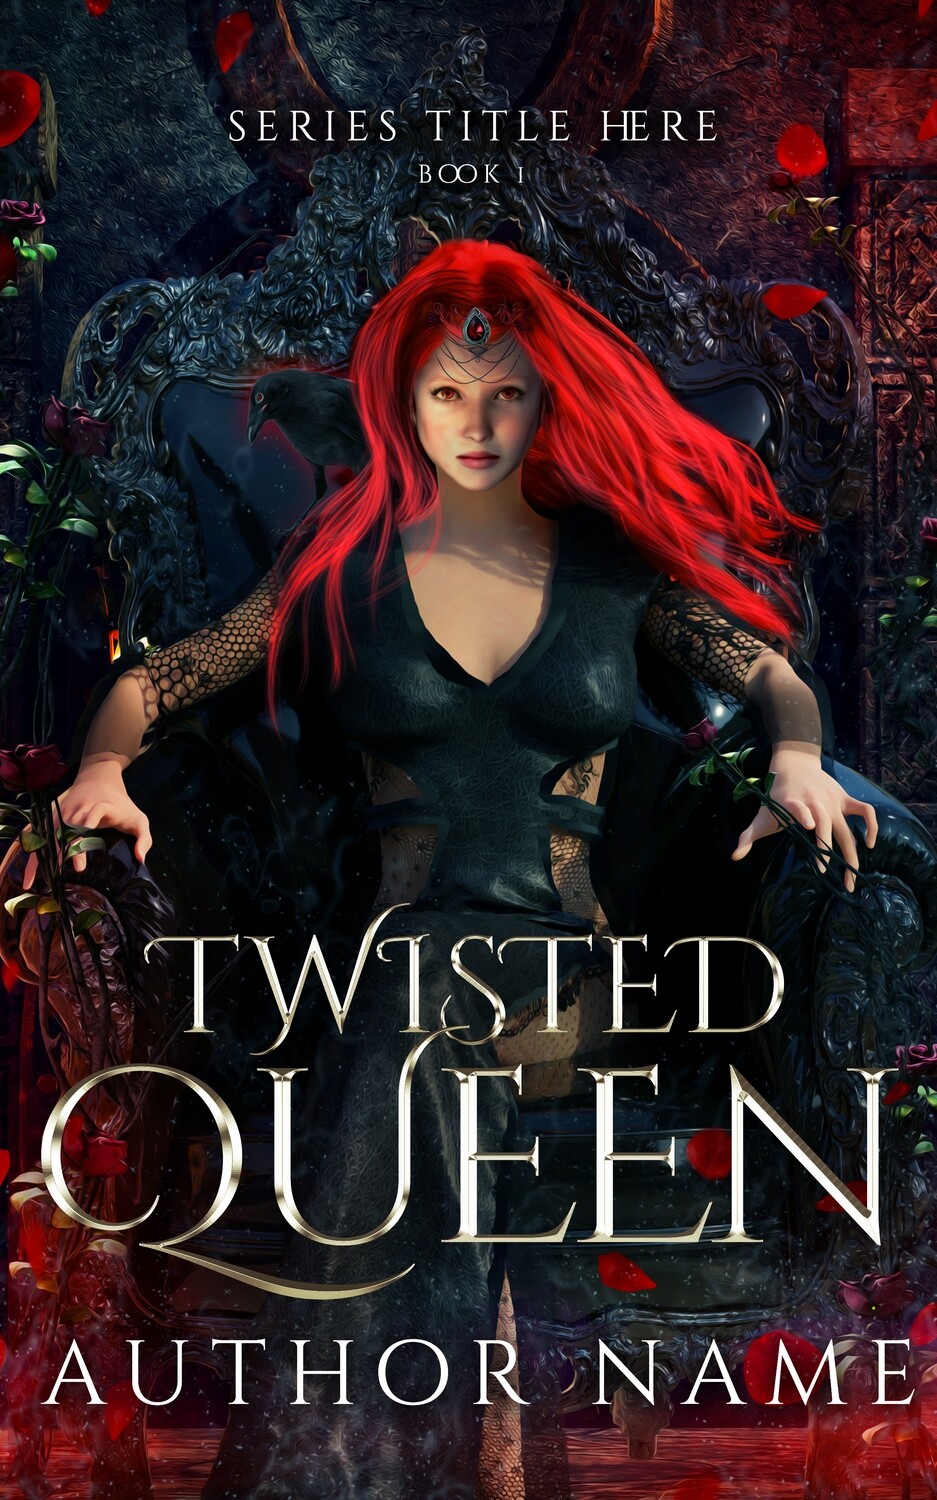 TWISTED QUEEN